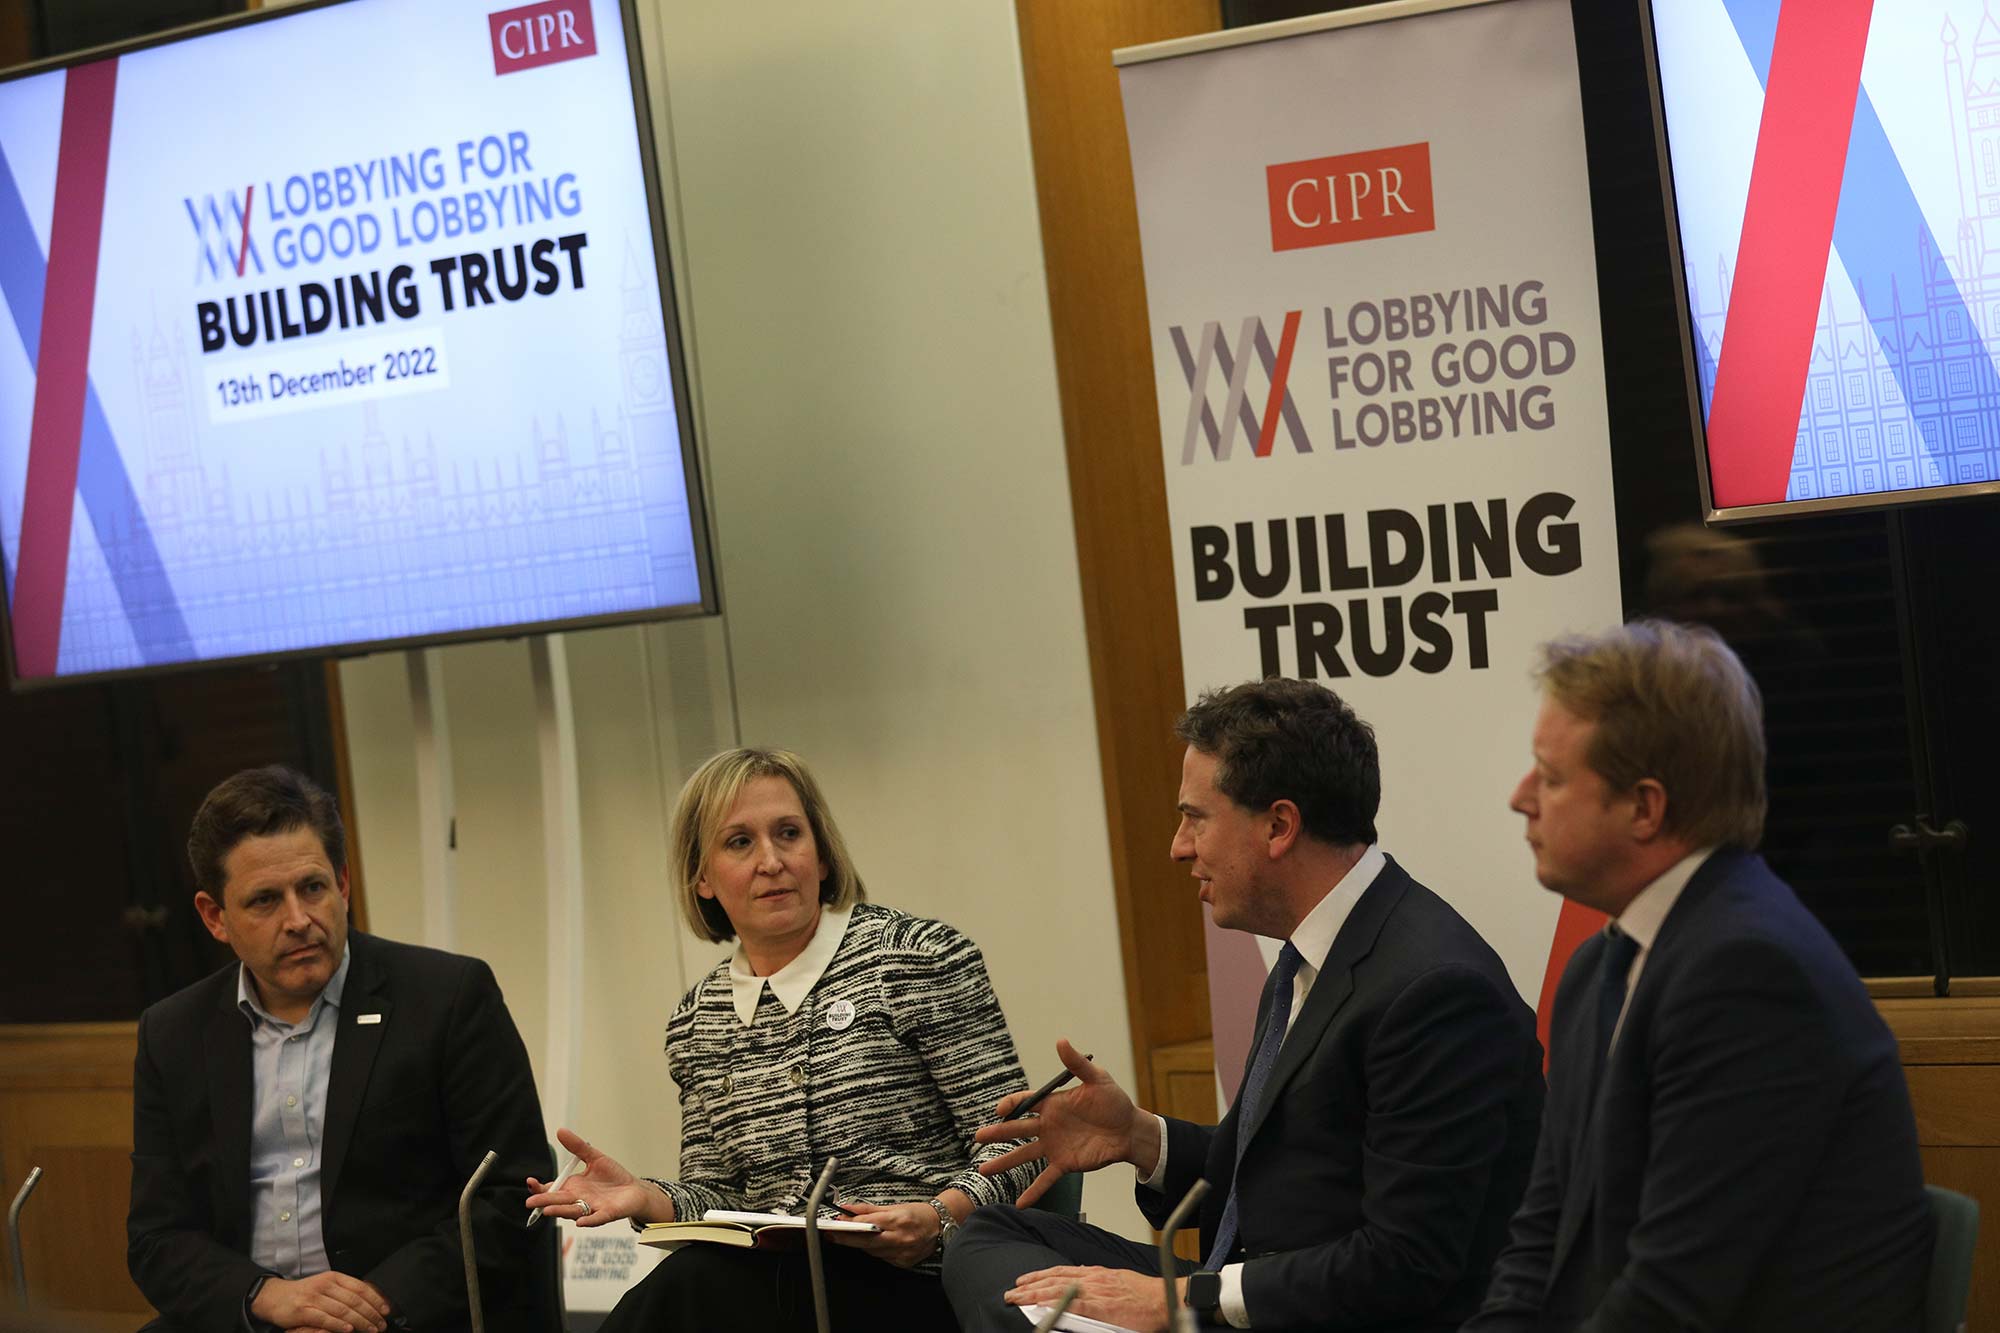 Photo of a panel of speakers composed of (from left to right) Duncan Hames, Director of Policy at Transparency International UK, Rachael Clamp, CIPR’s President-Elect, Sam Coates, Deputy Political Editor at Sky News) and Paul Bristow MP.